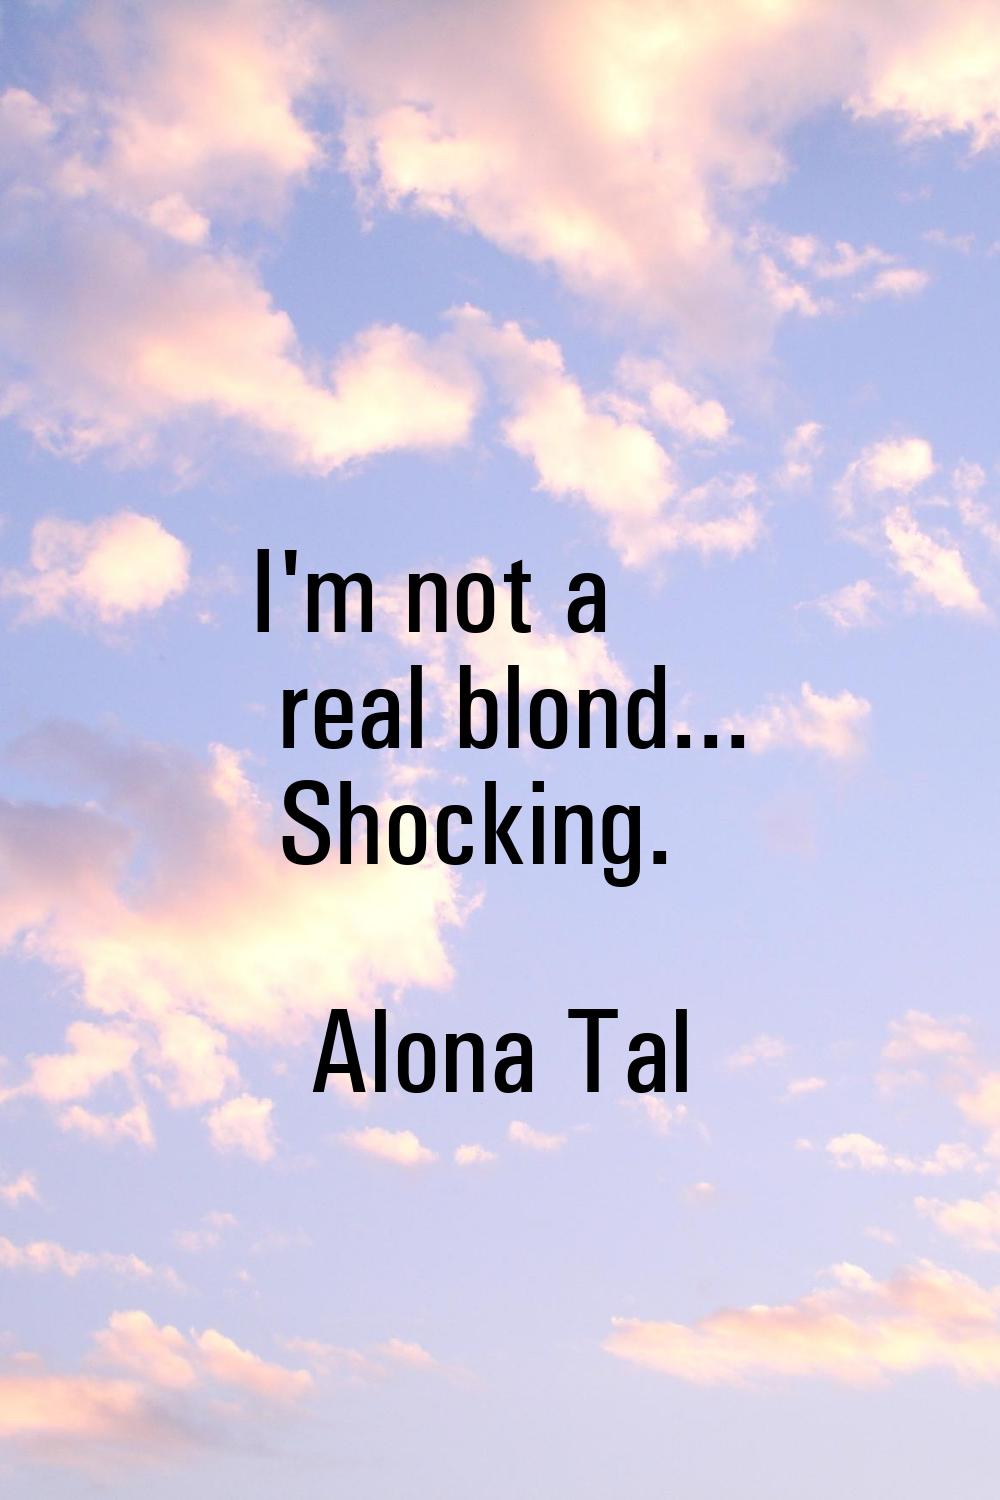 I'm not a real blond... Shocking.